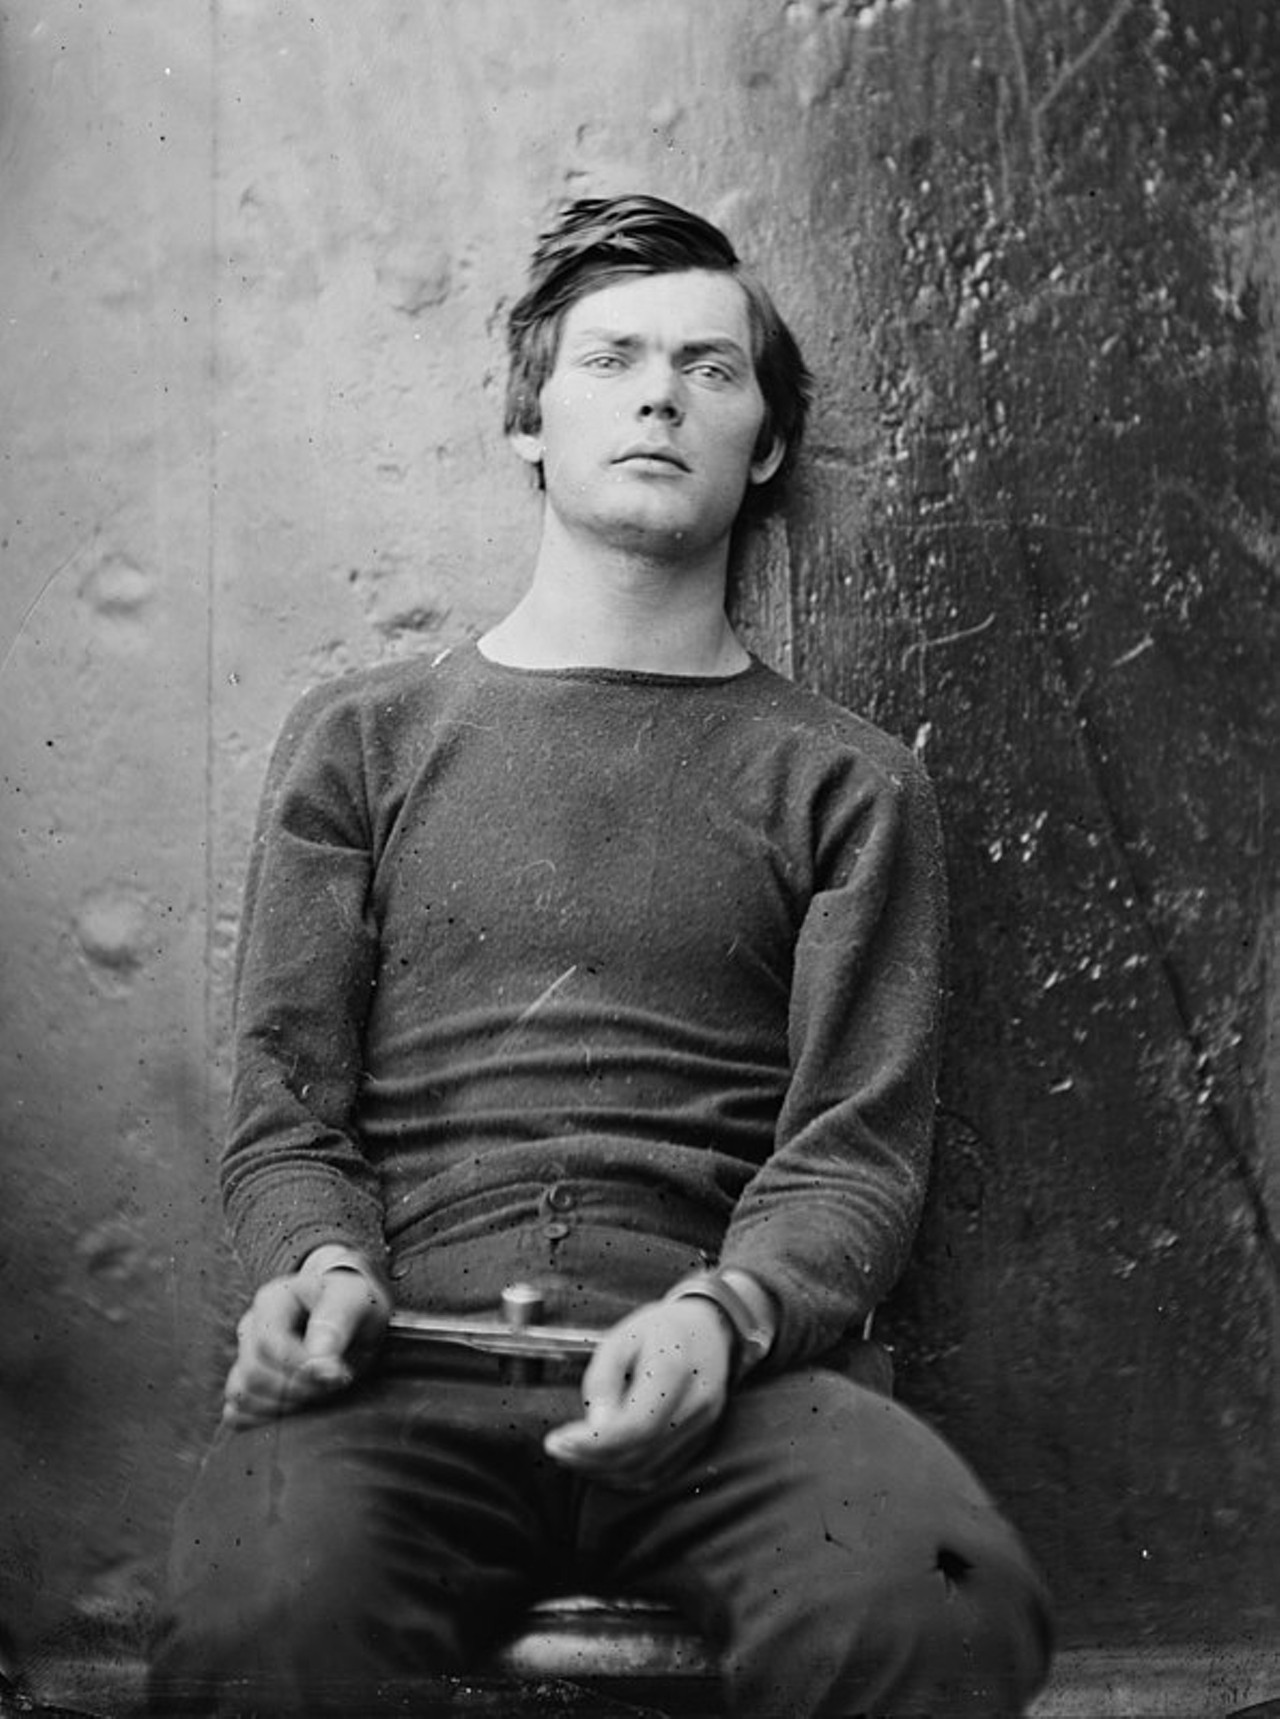 Lewis Powell's head
This co-conspirator in the successful plot to assassinate Abraham Lincoln has roots in Central Florida. In fact, he was buried here twice. In a twisting and weird tale his body wound up headless after he was executed for his part in the killing. That headless body was transported to Florida and buried according to his family. Many decades later, his skull was discovered by Smithsonian researchers. It was eventually buried near his family in Geneva.